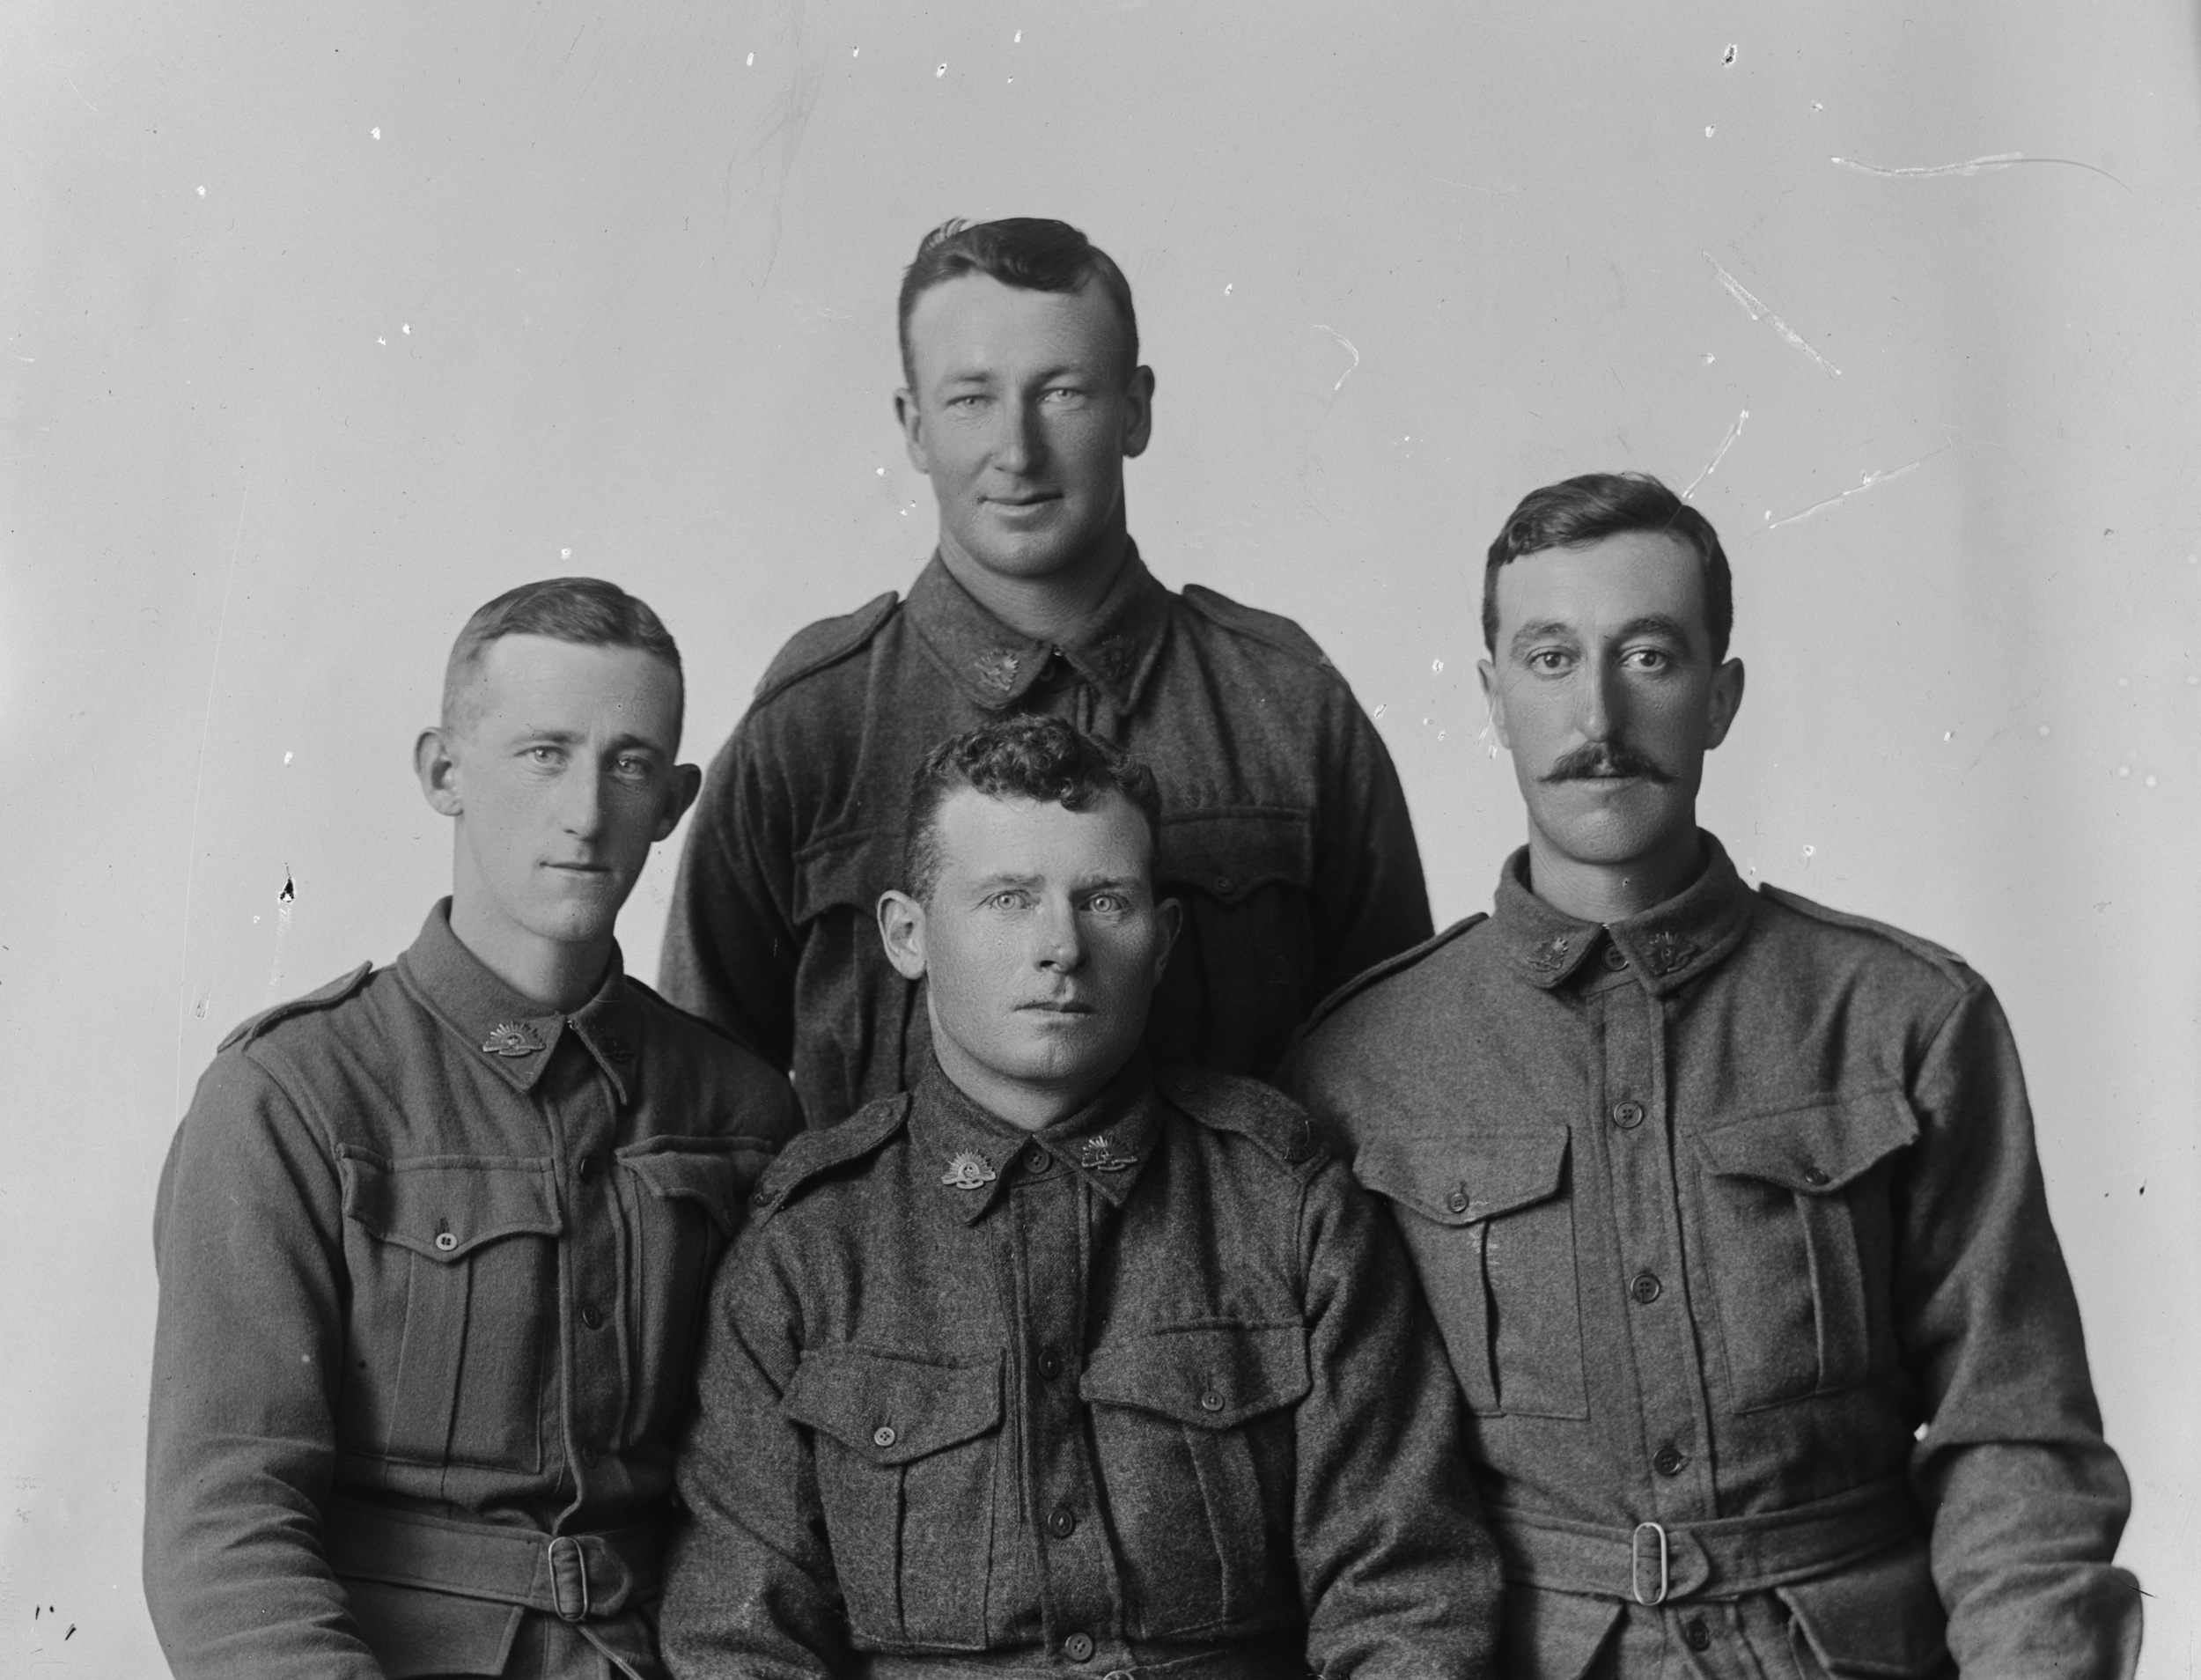 Photographed at the Dease Studio, 117 Barrack Street Perth WA Image courtesy of the State Library of Western Australia: 108058PD